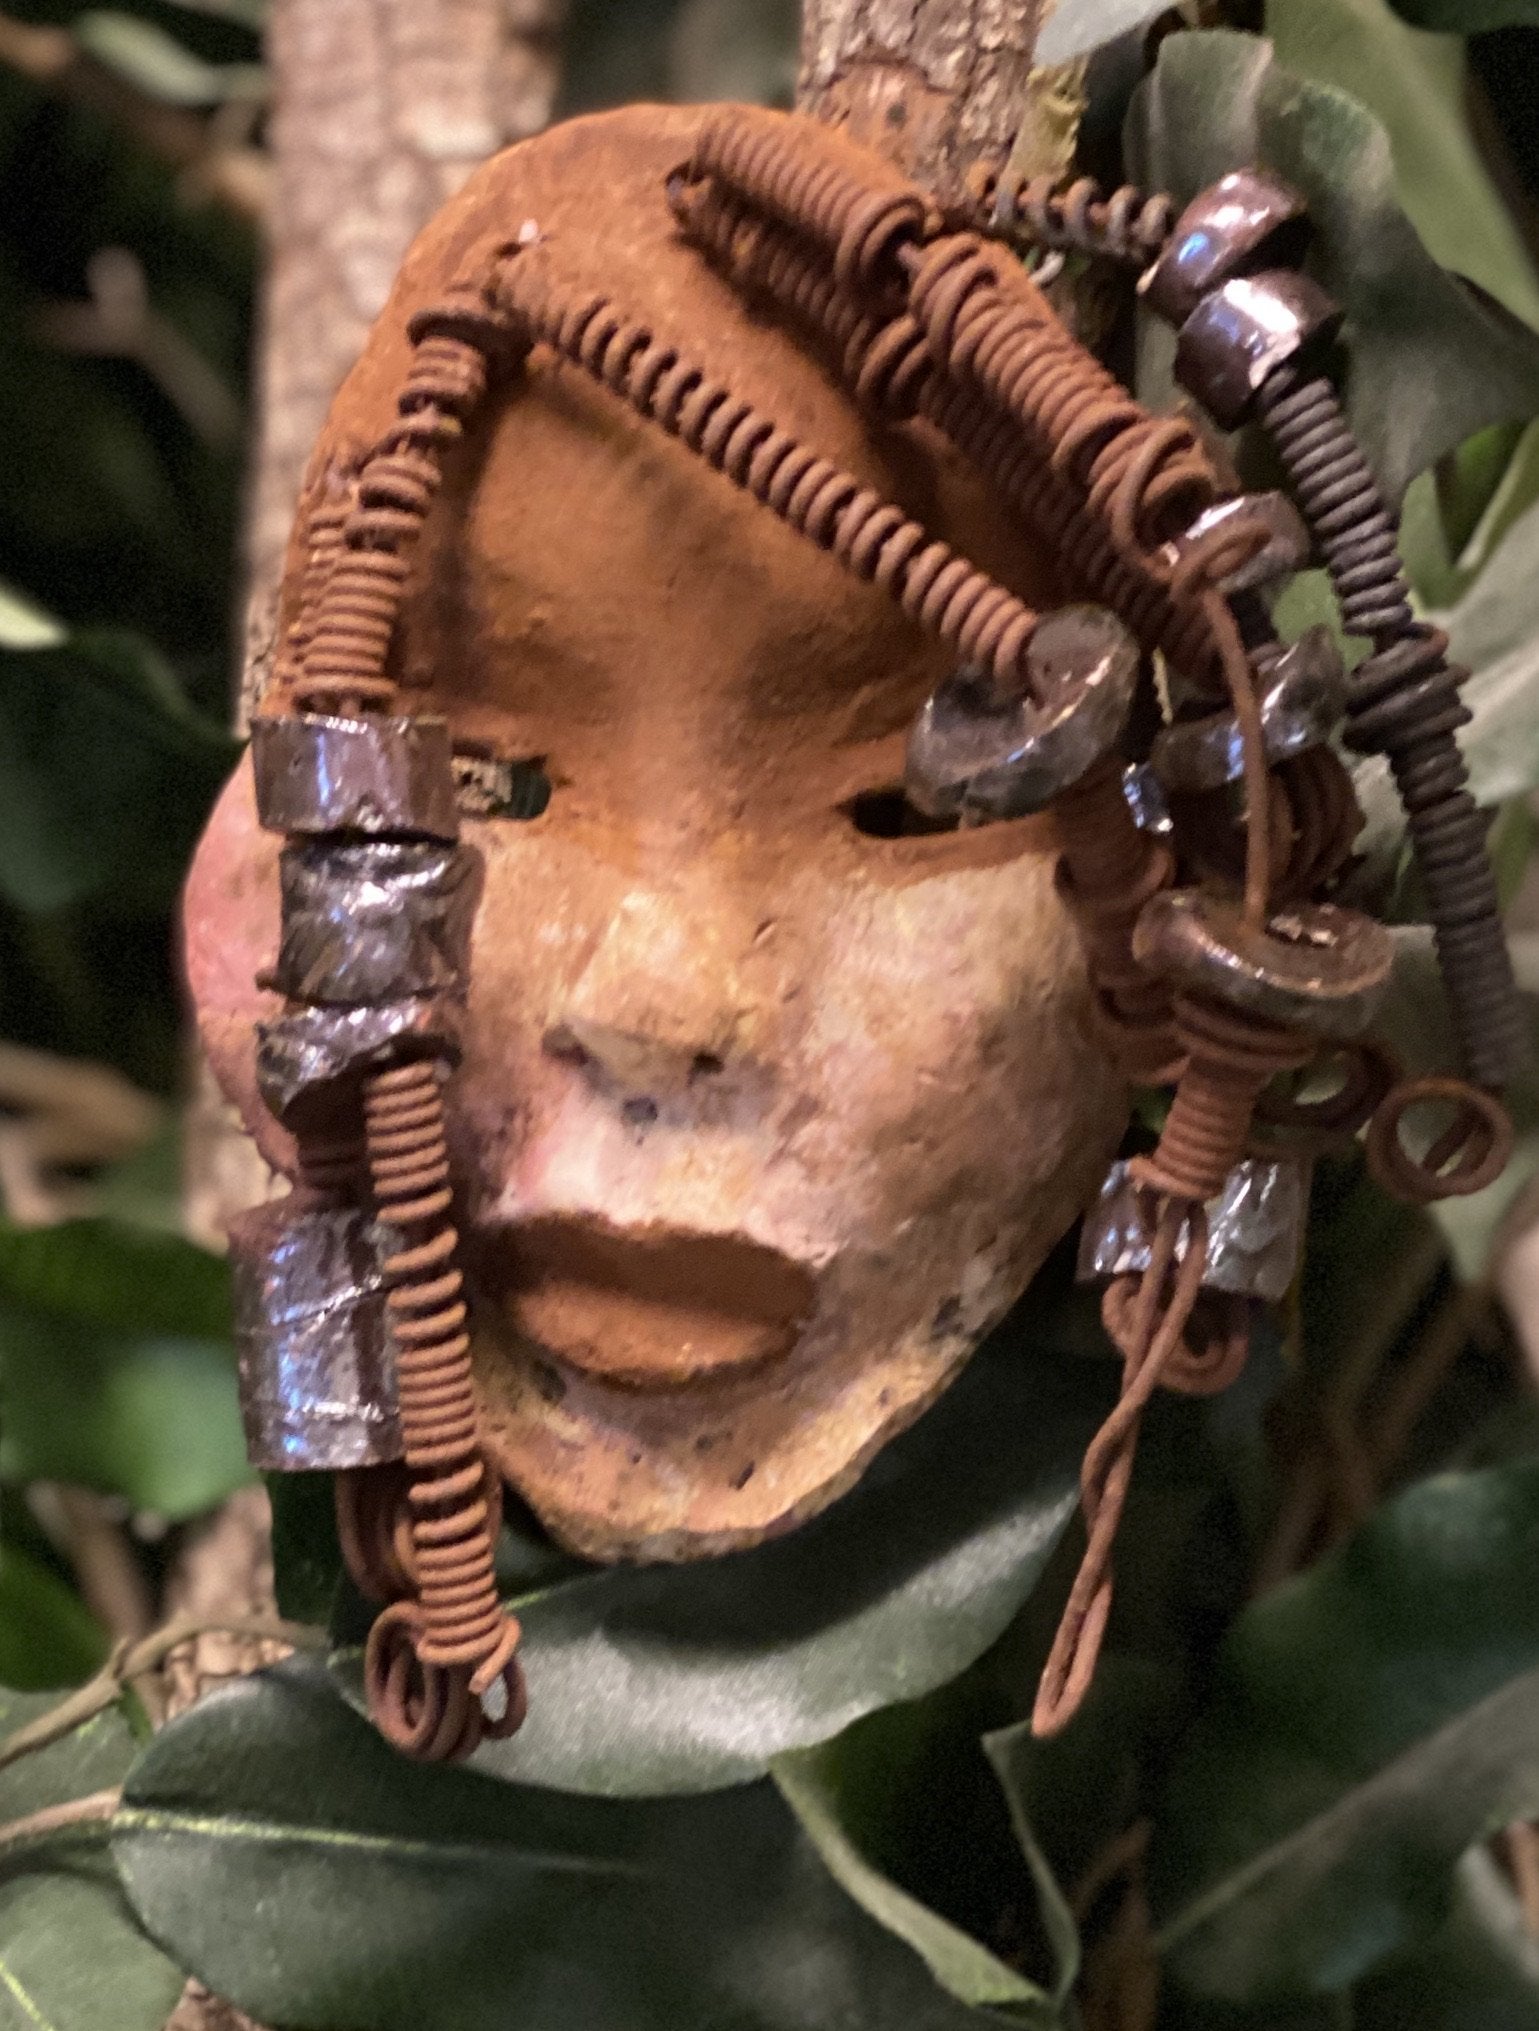 Macey  has a complexion of light and dark honey. She is 5" x 7" and weighs 1.1 lbs. Macey has over 20 handmade raku fired beads. She has over 15 feet of coiled 16 gauge wire hair.